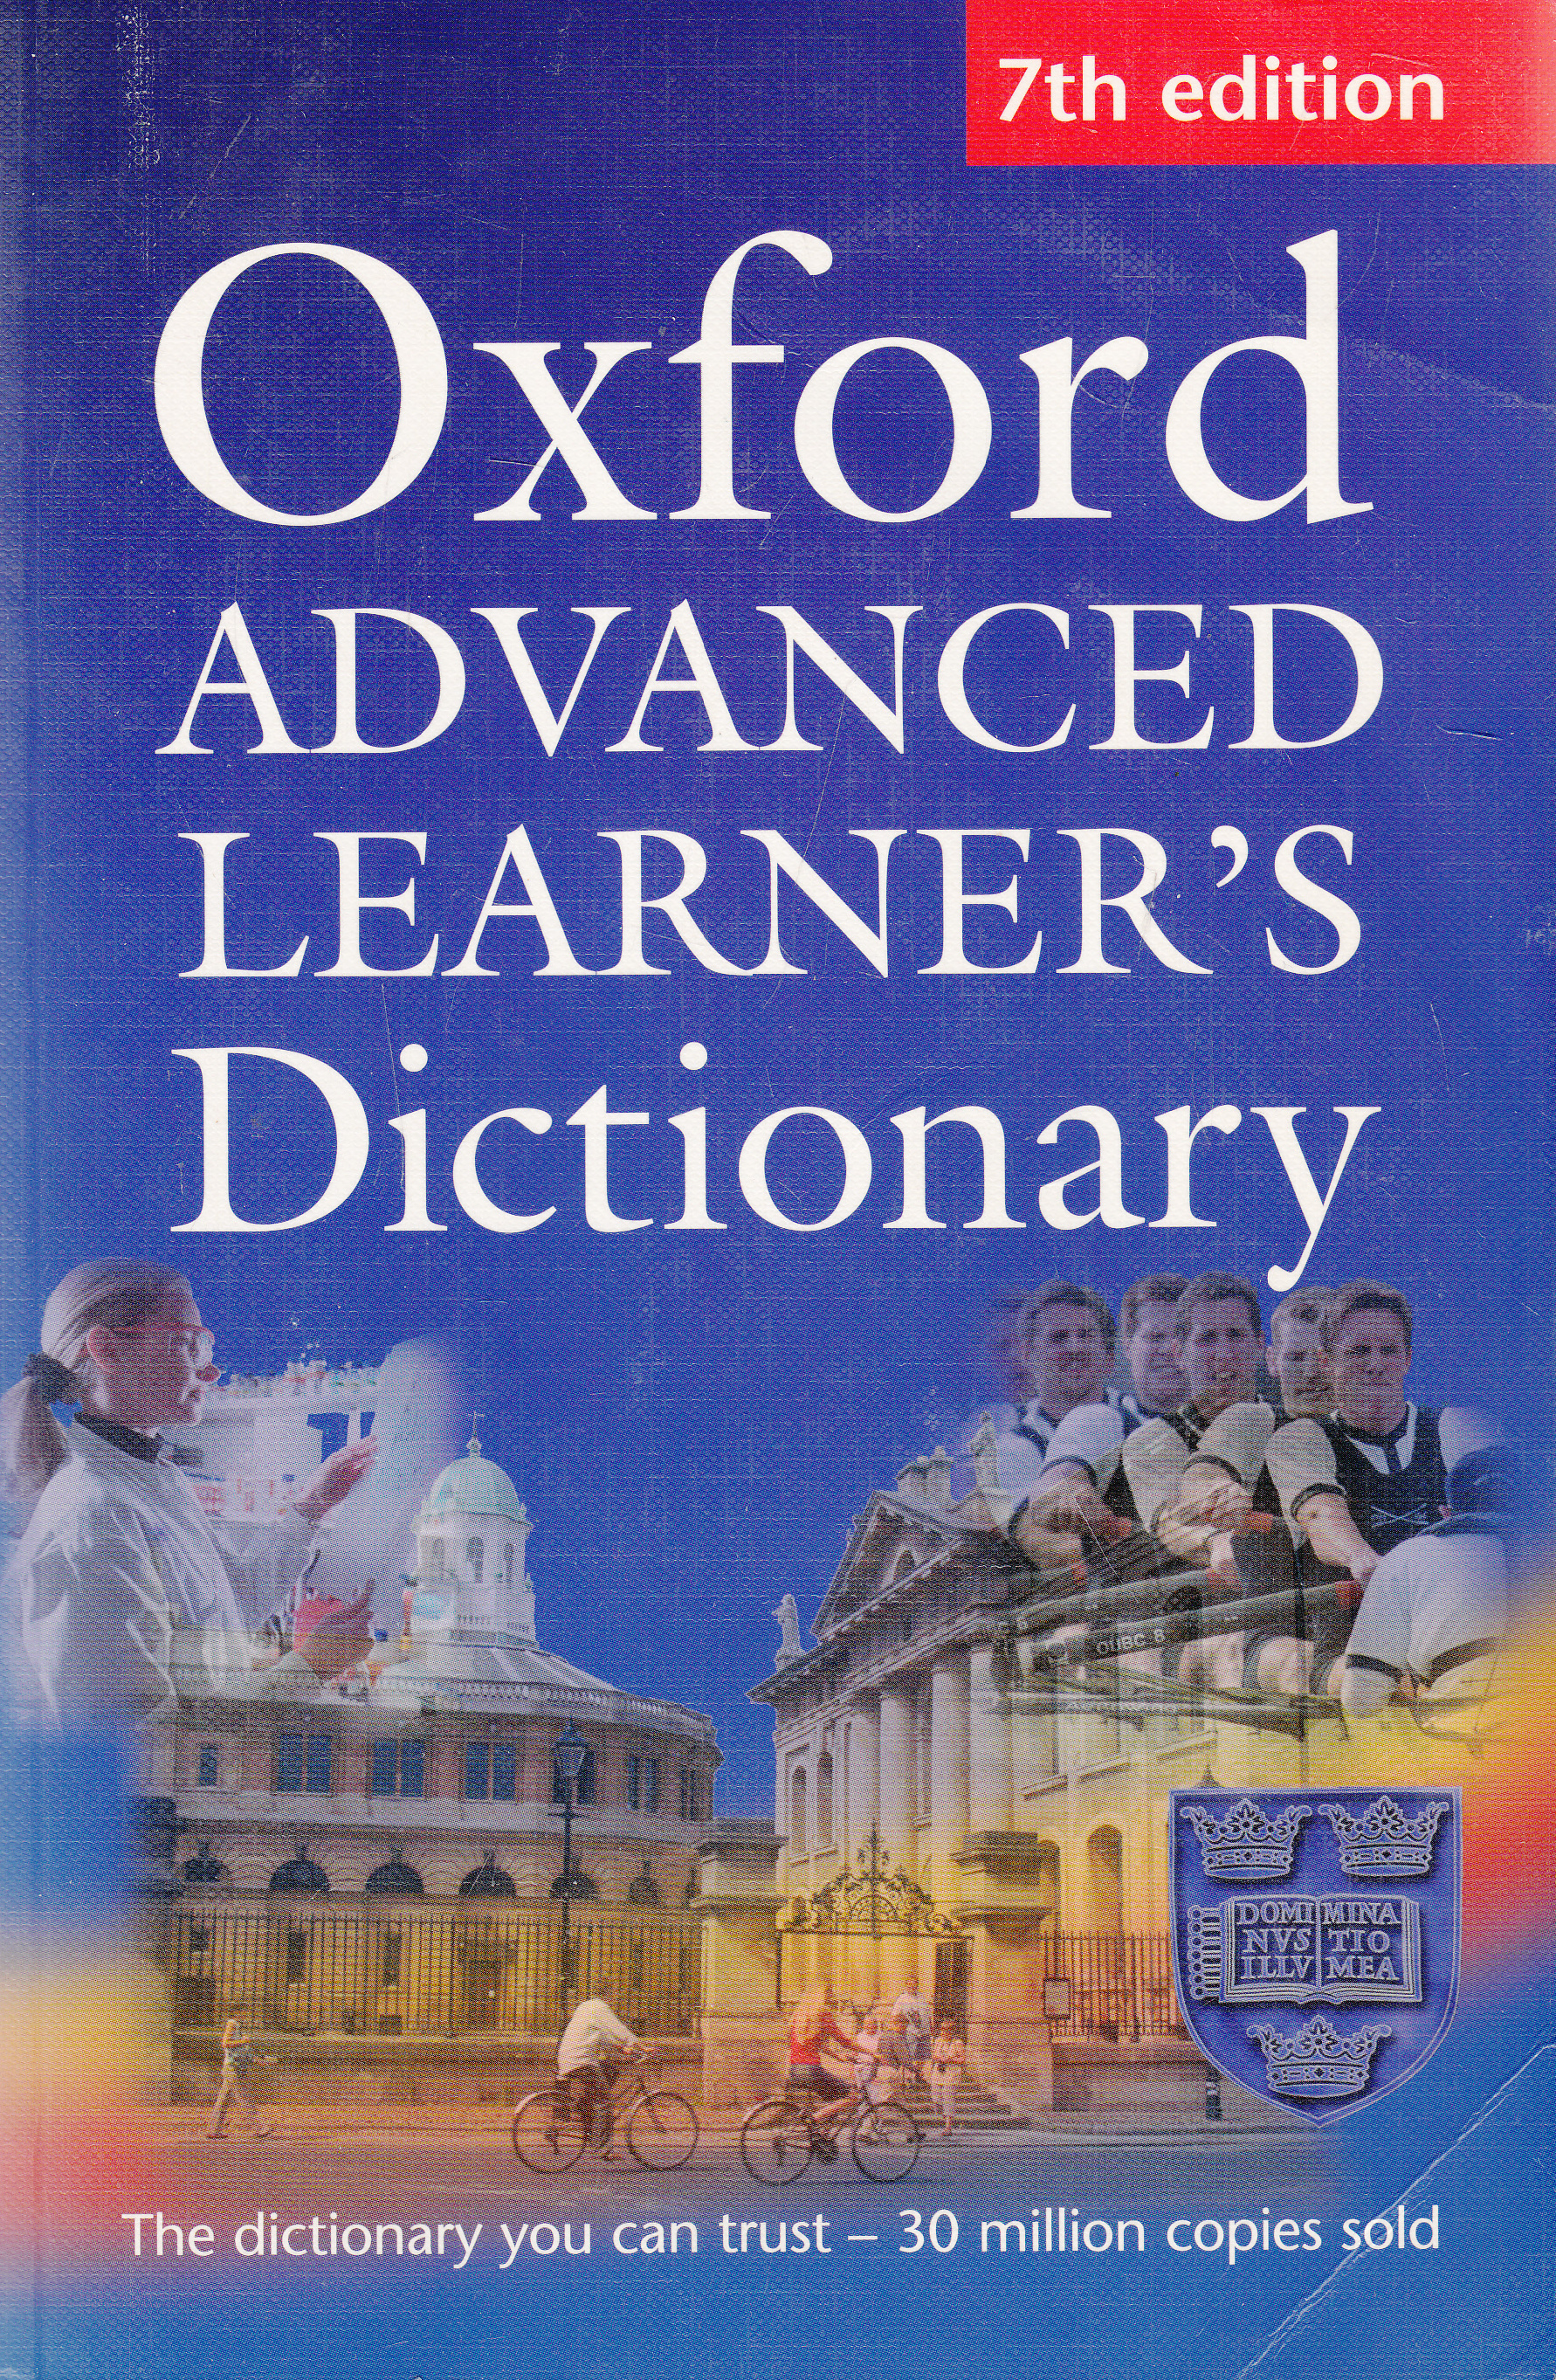 Advanced learner s dictionary. Oxford Advanced Learner's Dictionary. Словарь Oxford. Oxford Advanced Learner's Dictionary книга. Оксфордский словарь.